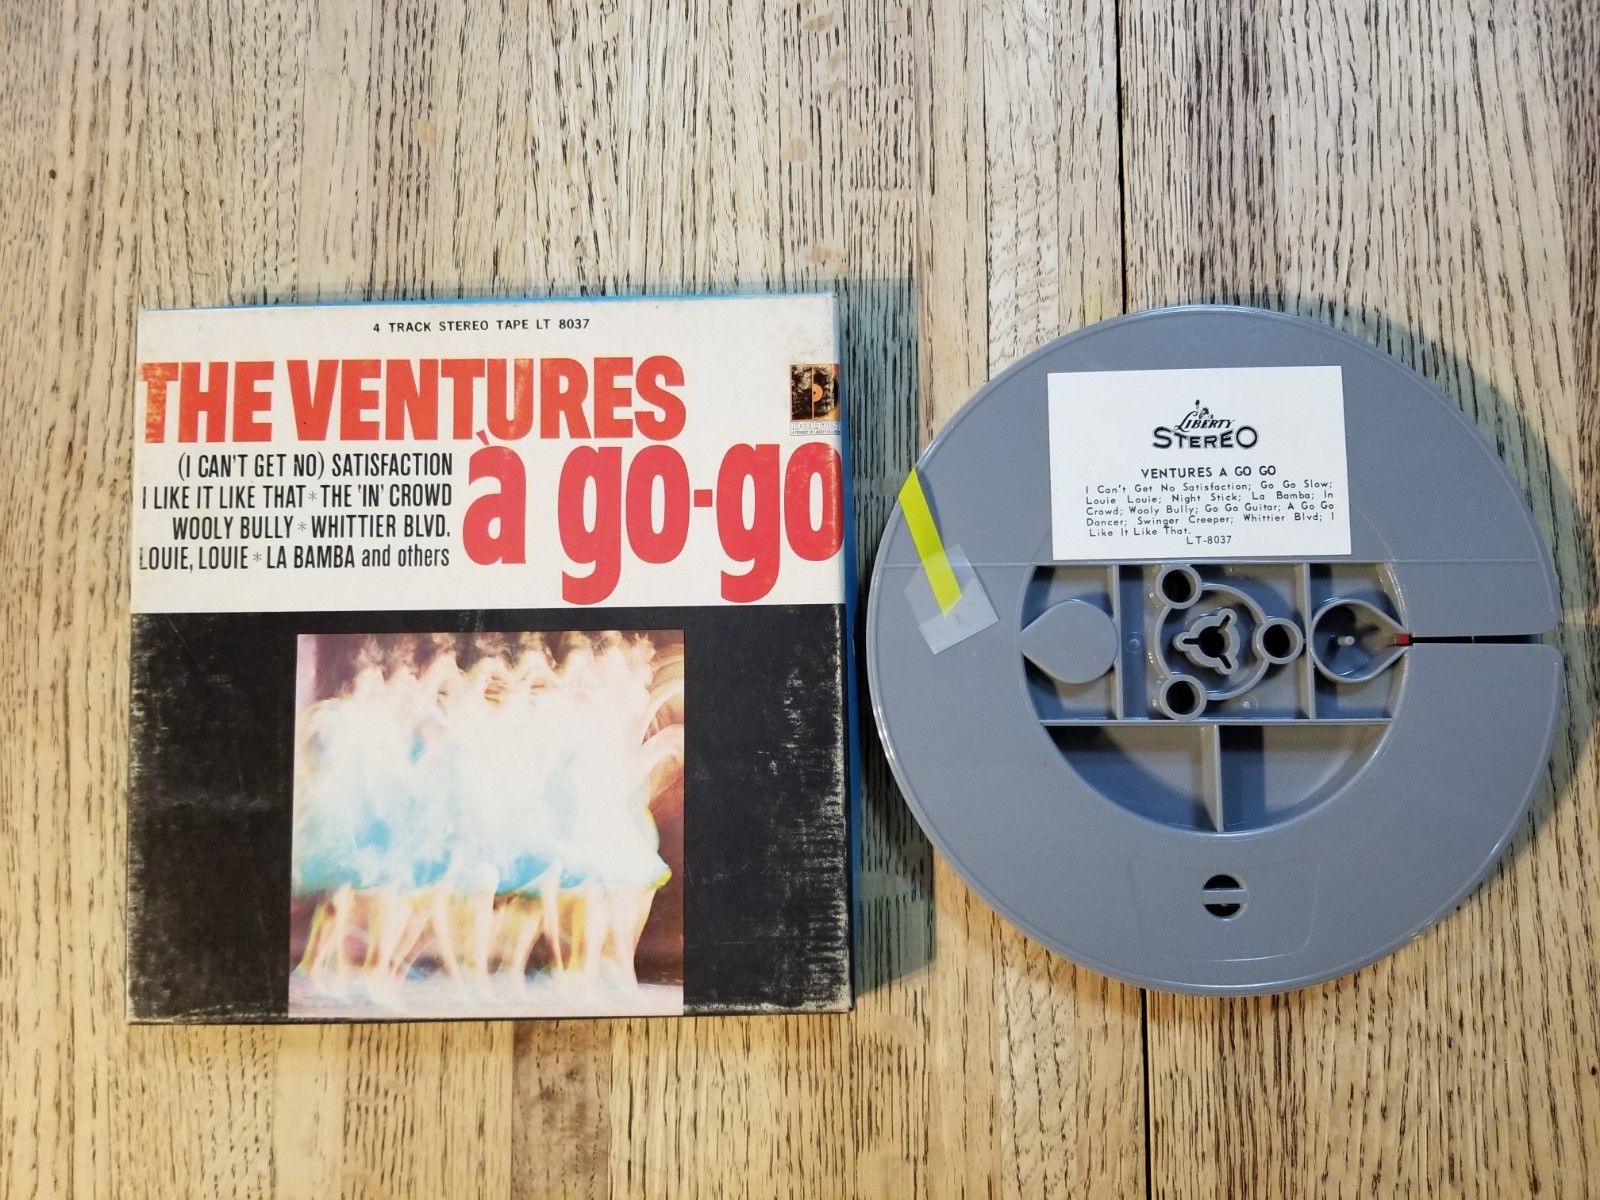  The Ventures A Go Go Reel To Reel Tape 7 1/2 IPS - auction  details